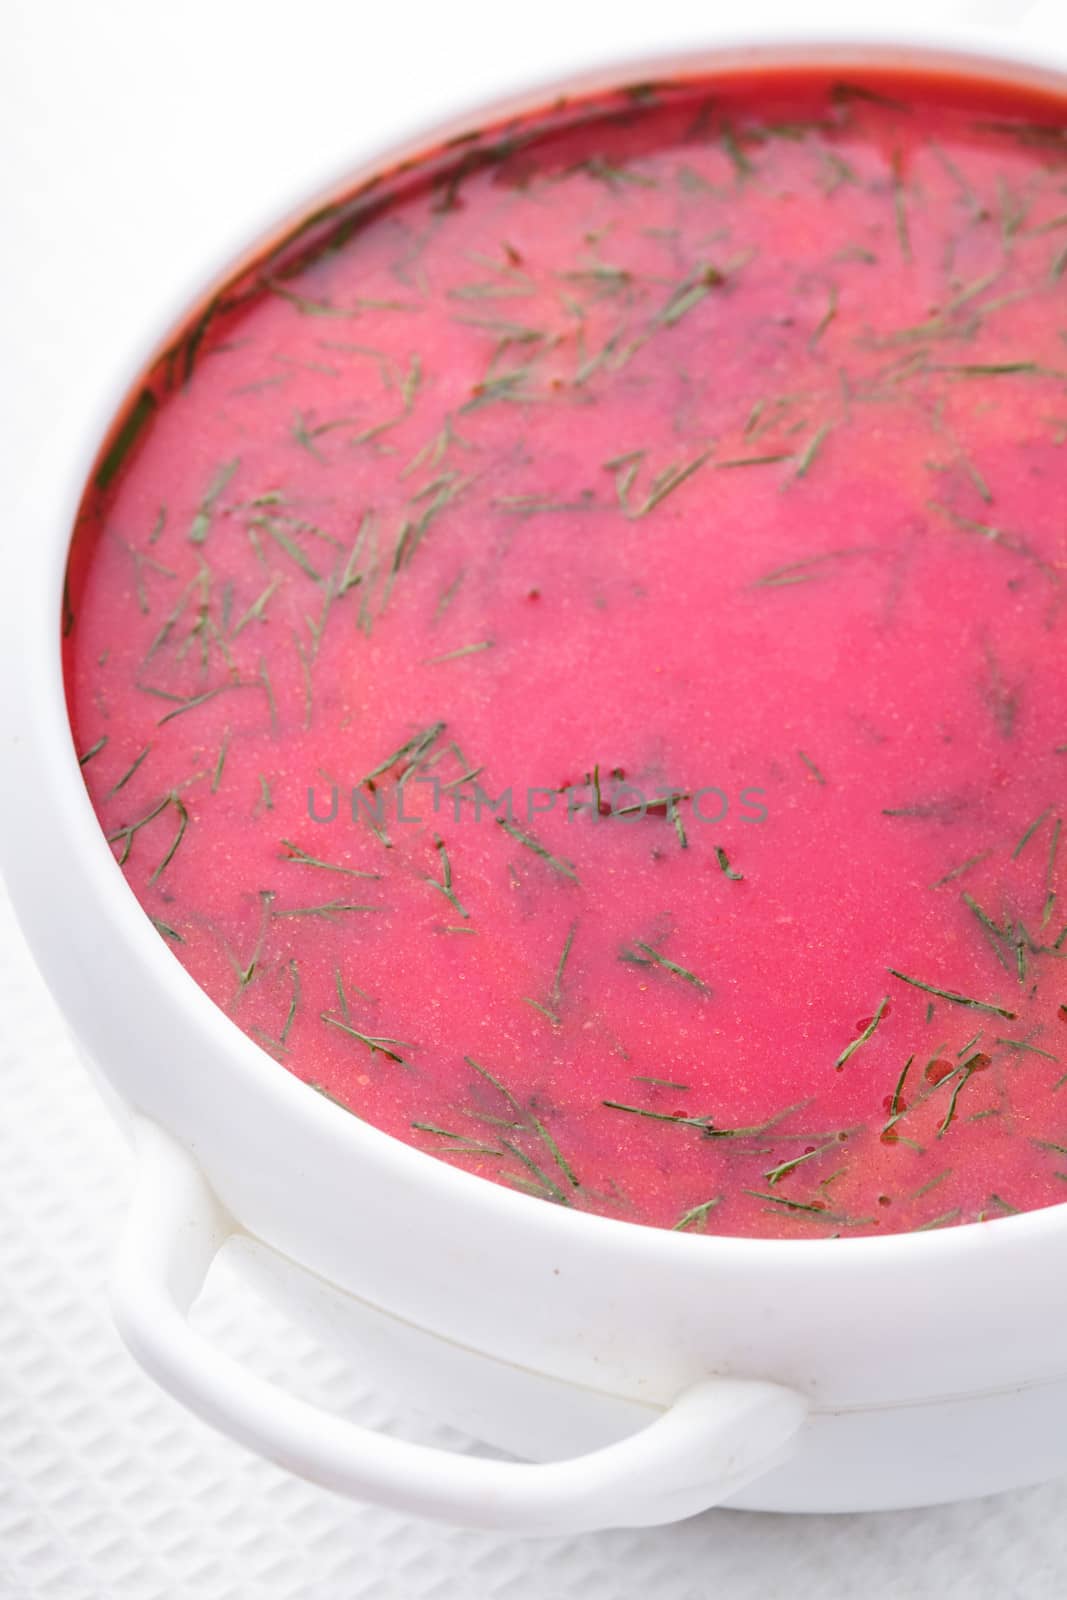 Beetroot soup by oksix